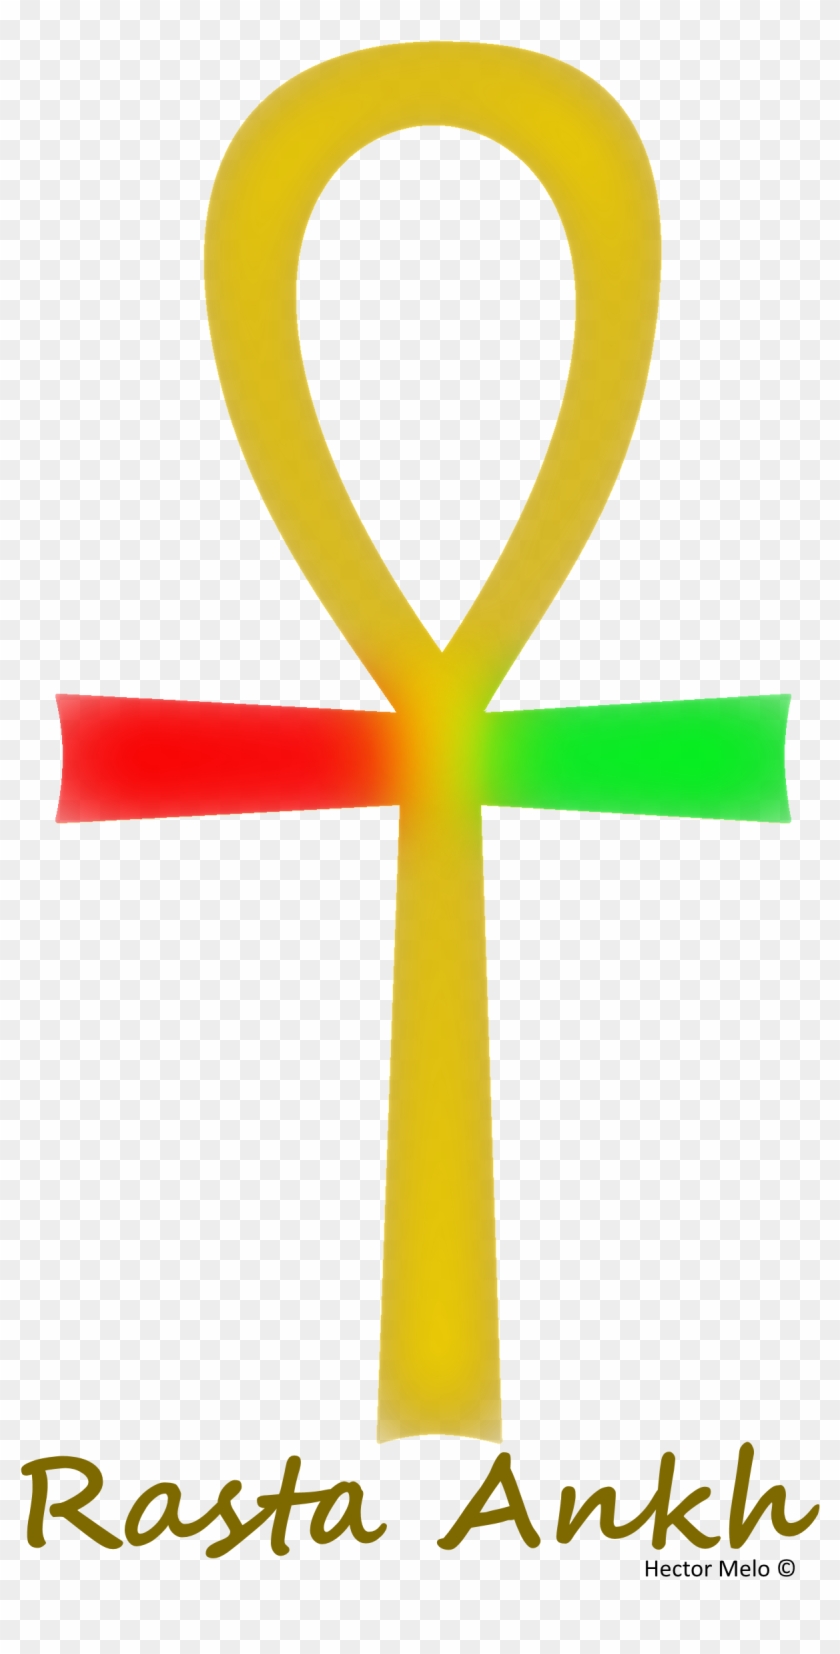 Rasta Ankh Is A Design Created By Hector Melo © - Rasta Ankh Is A Design Created By Hector Melo © #1503919